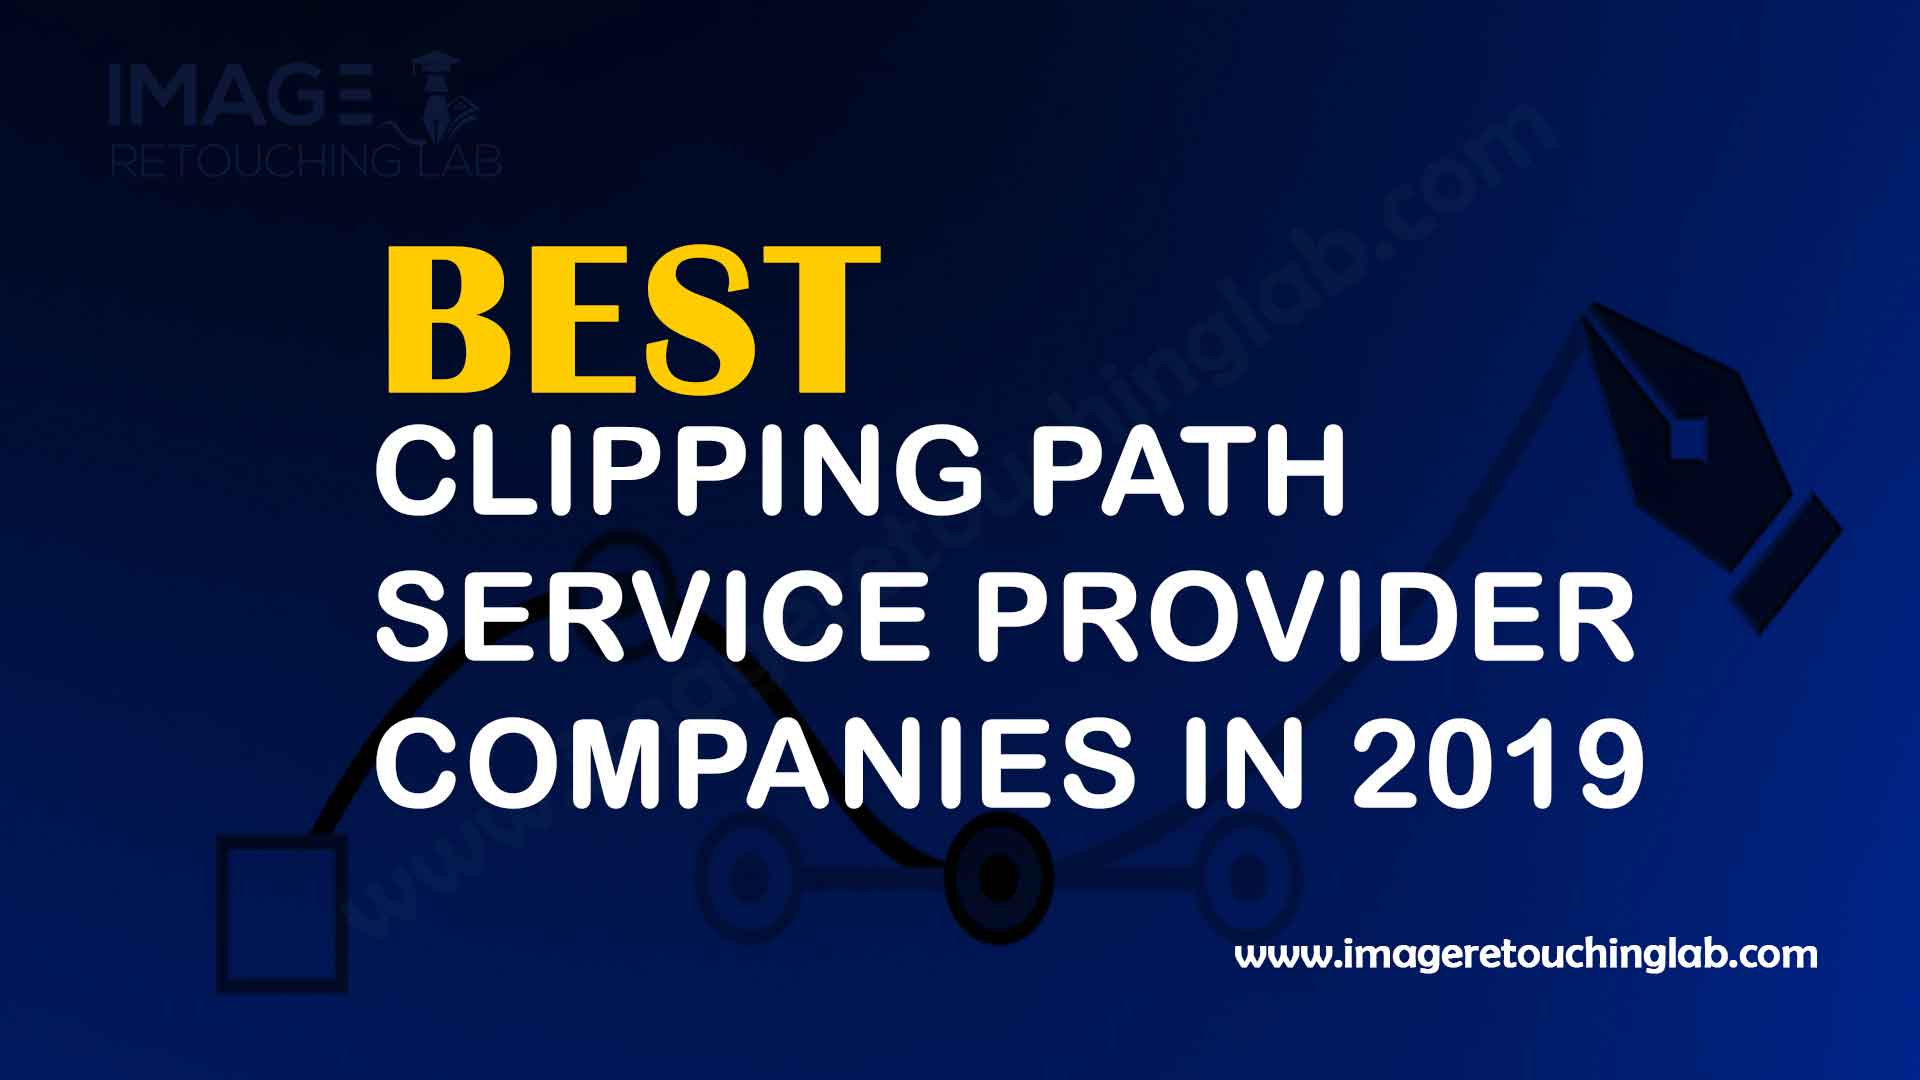 Best Clipping Path Service Provider Companies in 2019